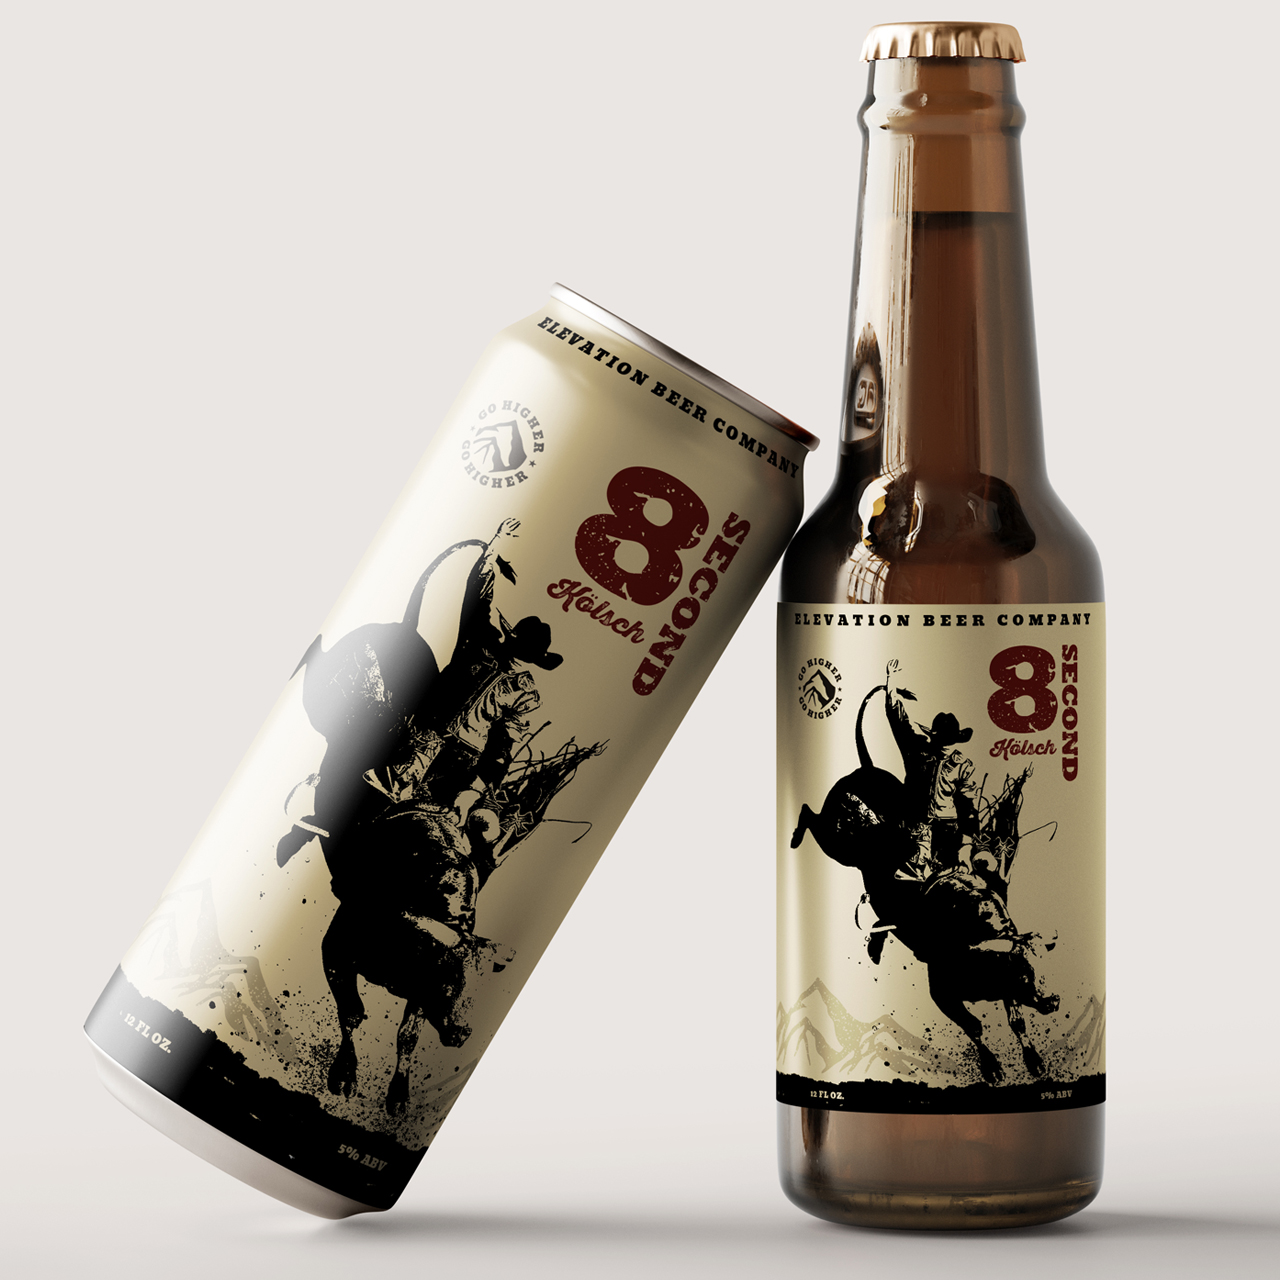 Image of Elevation Beer Company's Eight-Second Kolsch beer can and bottle package design with can leaning against the bottle